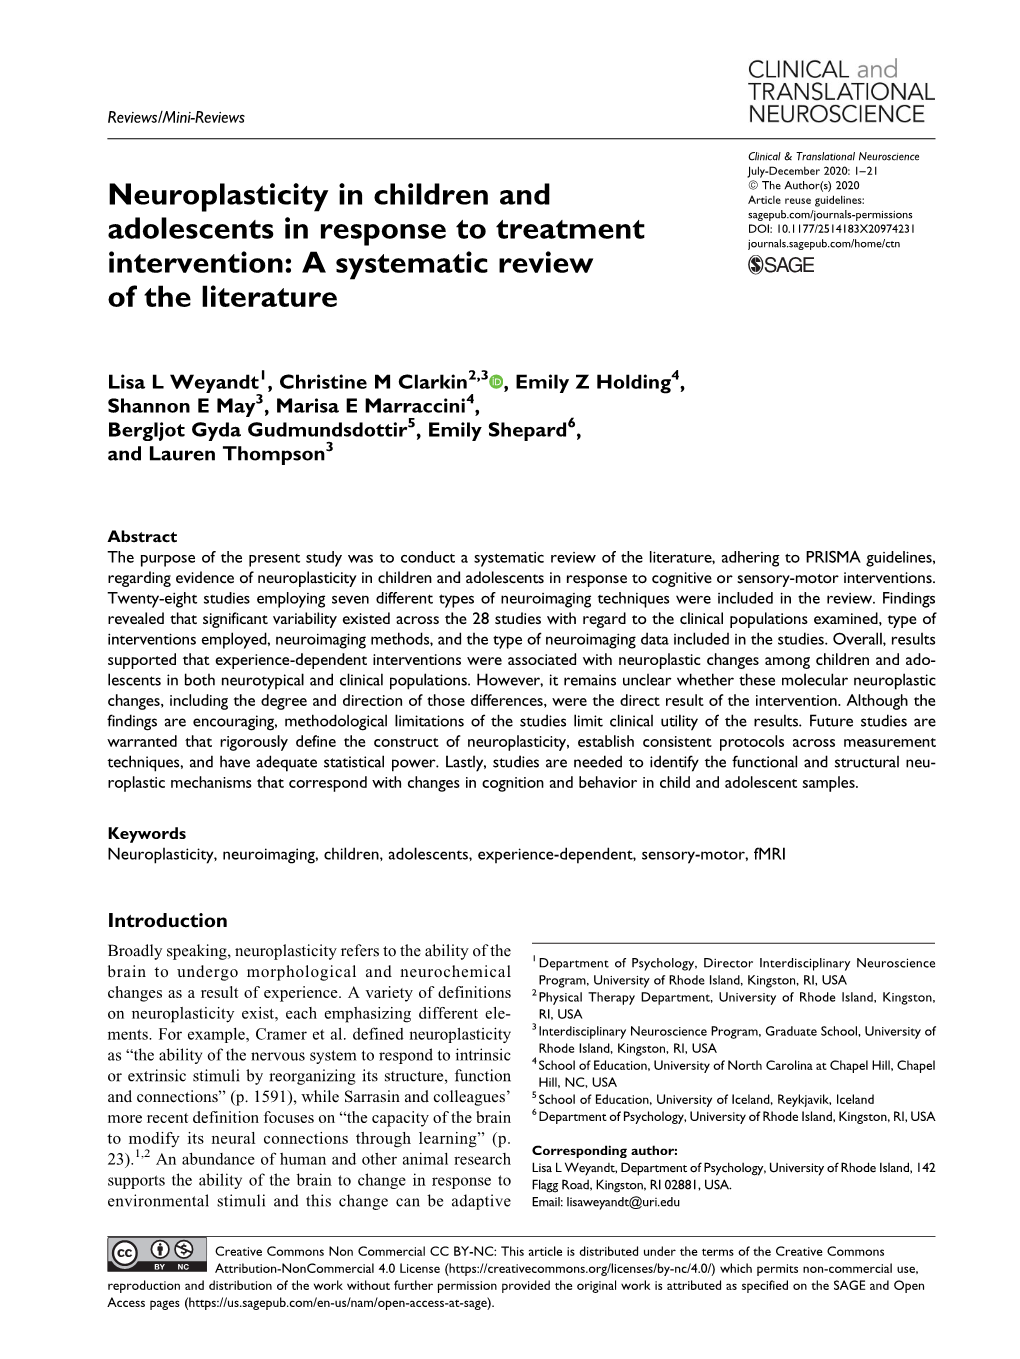 Neuroplasticity in Children and Adolescents in Response to Cognitive Or Sensory-Motor Interventions